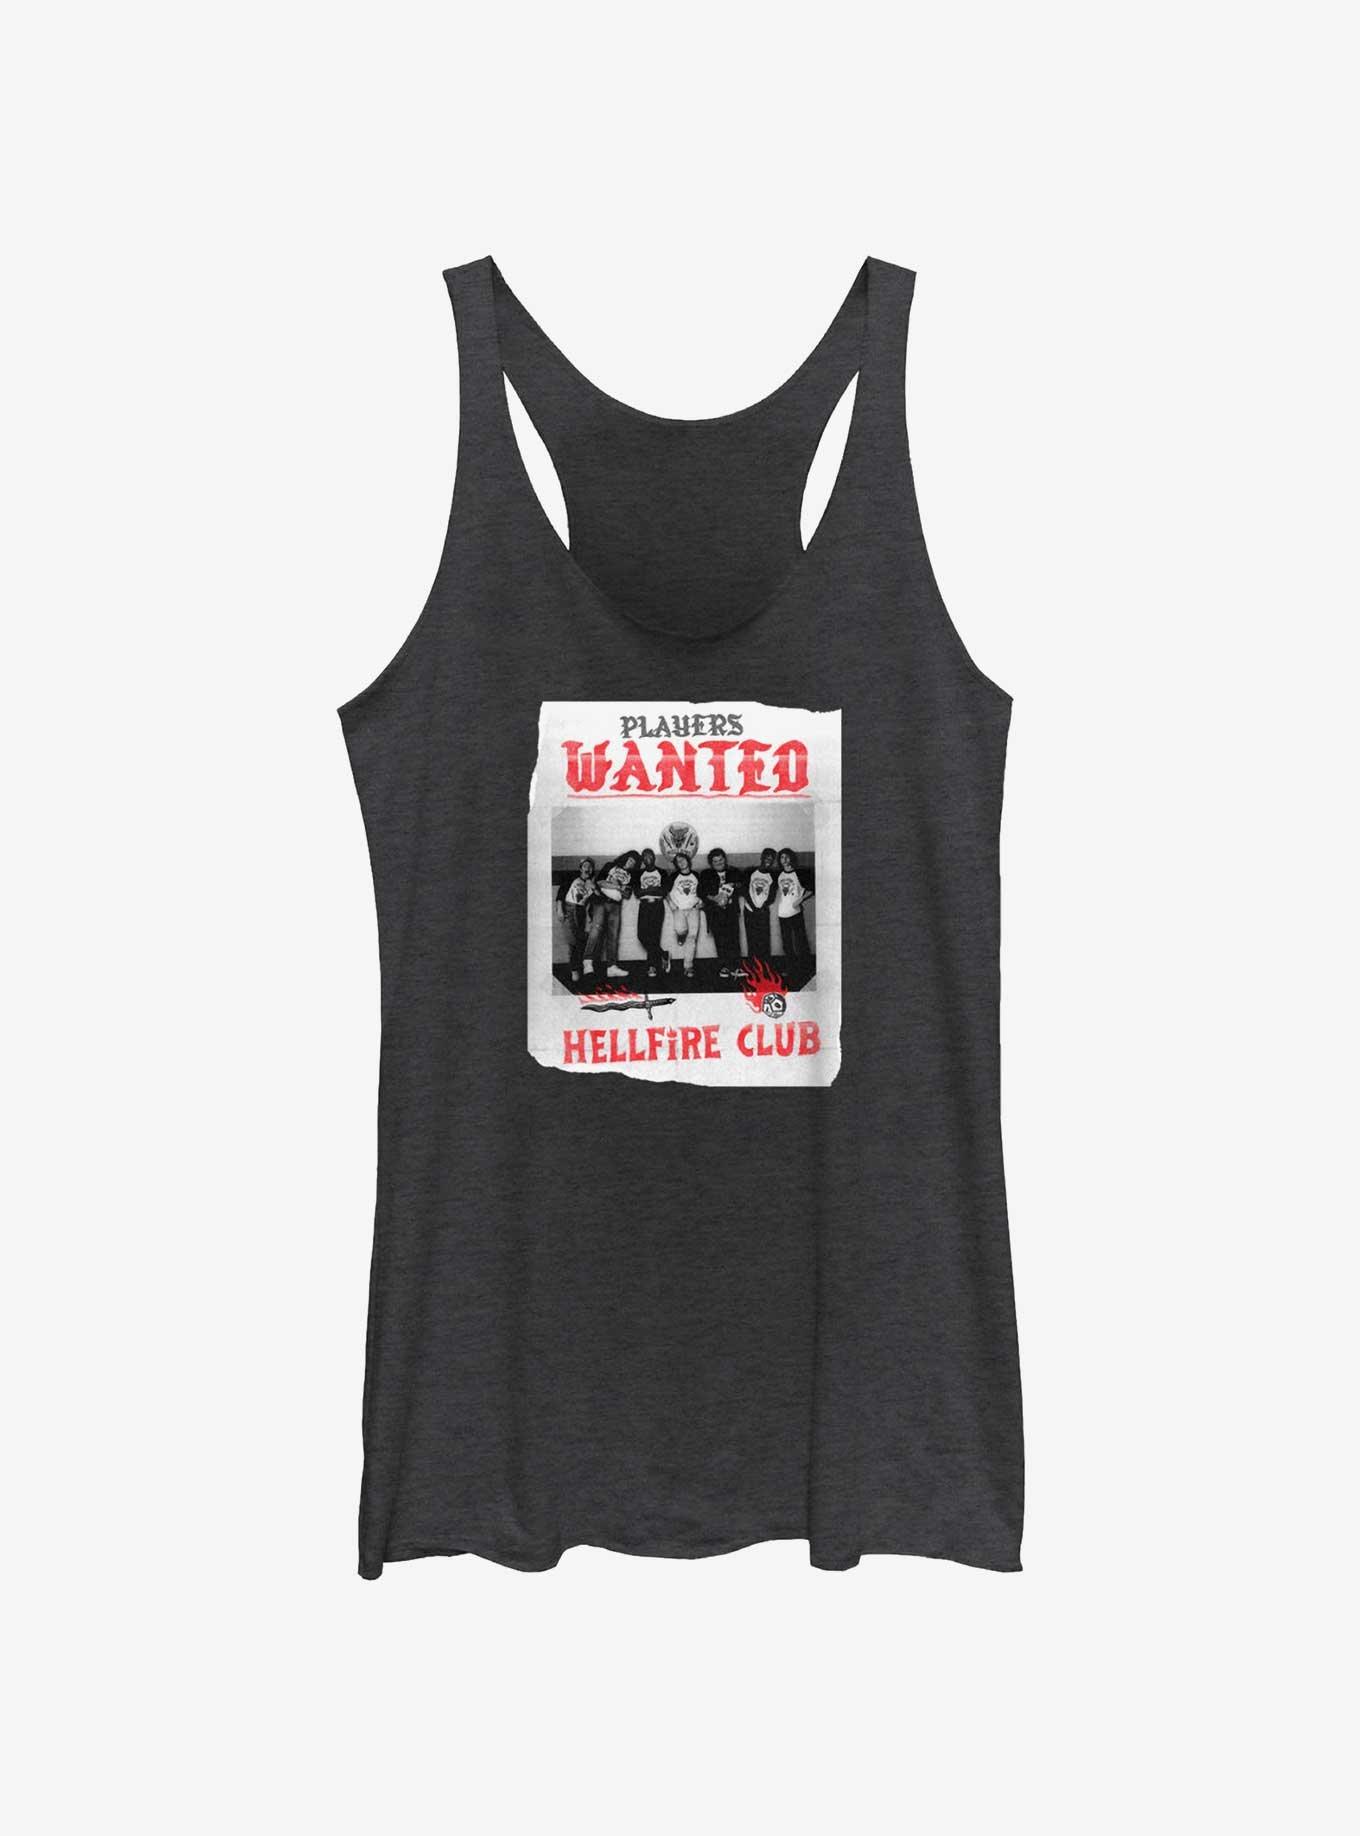 Stranger Things Hellfire Club Players Wanted Poster Womens Tank Top, BLK HTR, hi-res